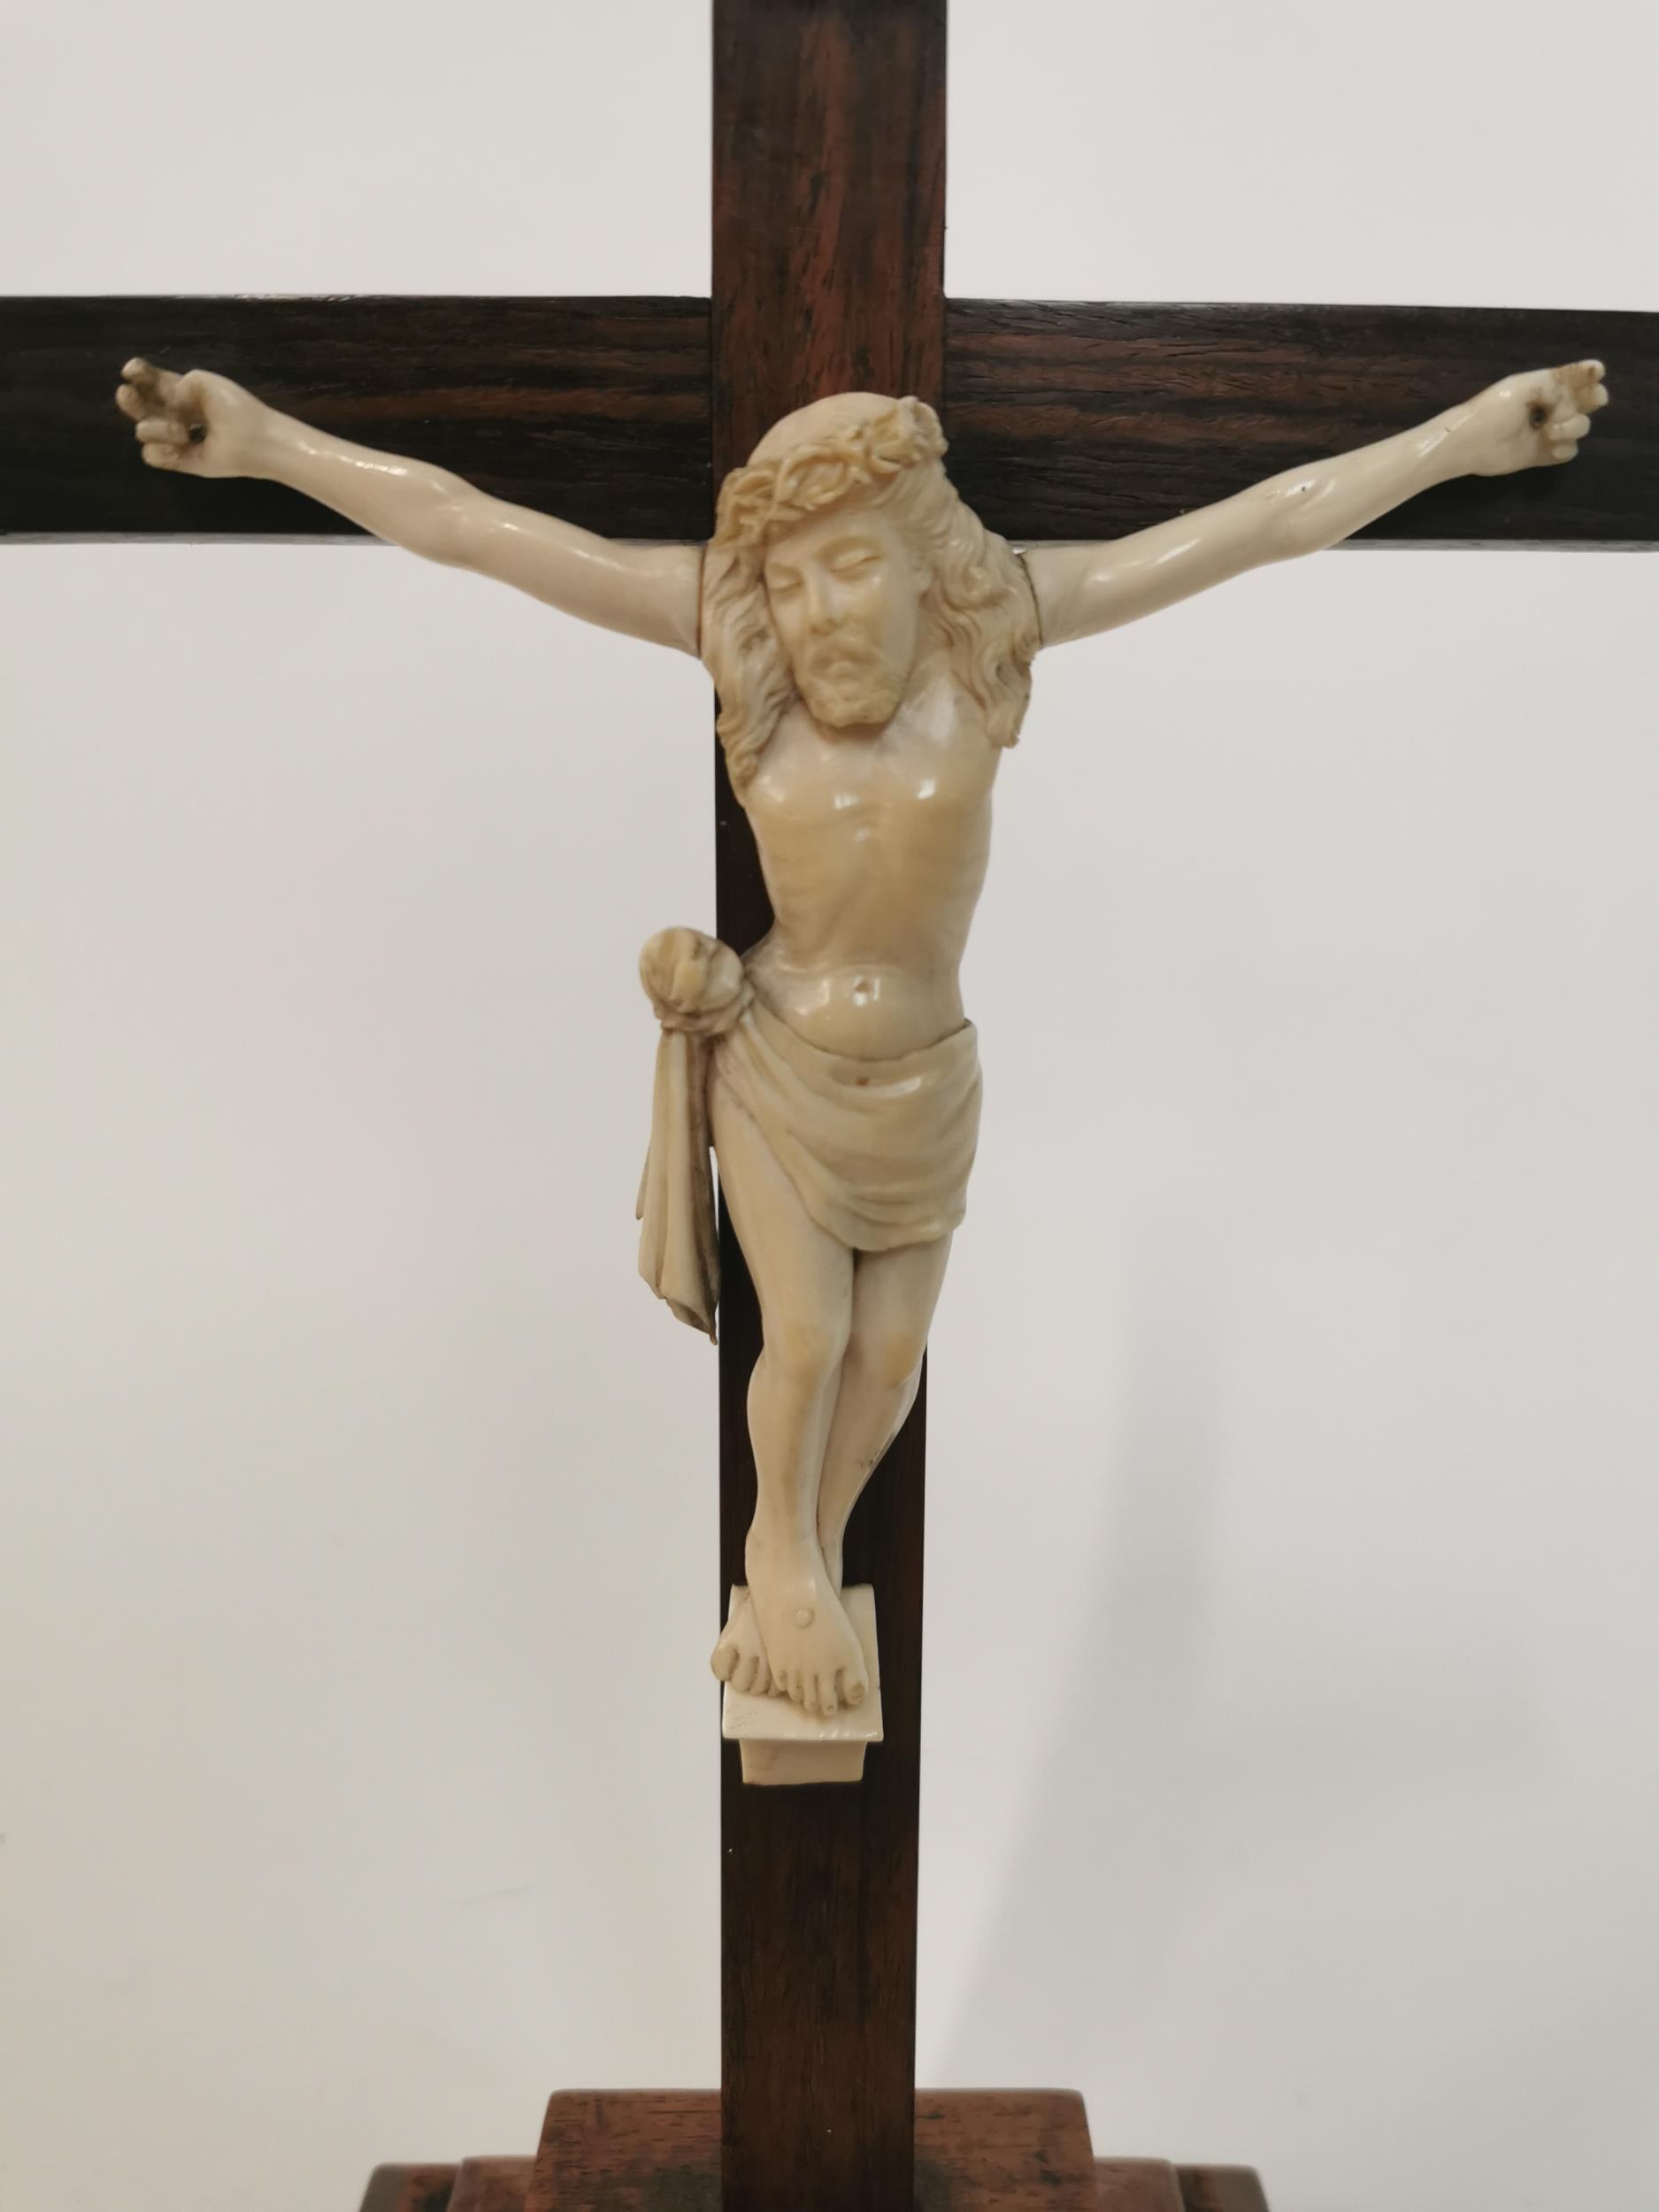 Carved oak and Ivory Crucifix. {34 cm H x 17 cm W x 11 cm D}. - Image 4 of 6